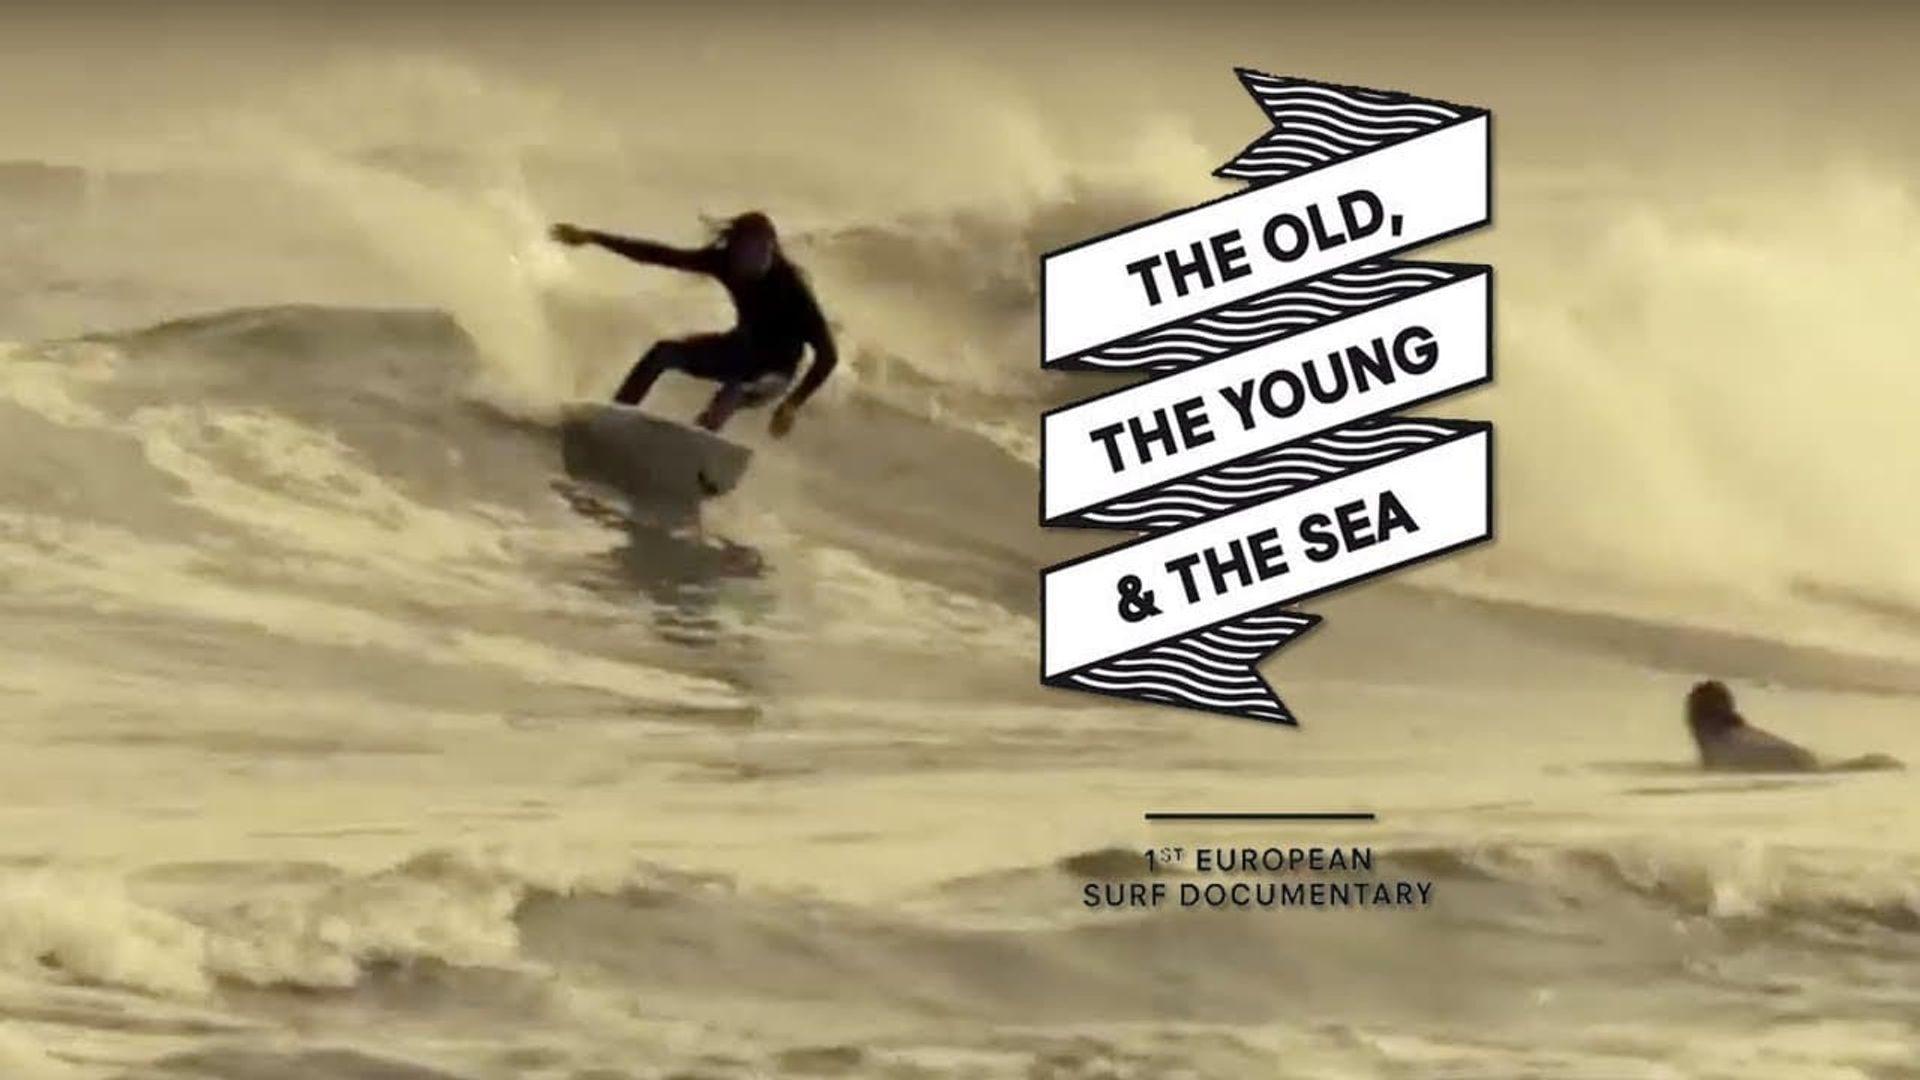 The Old, the Young & the Sea background